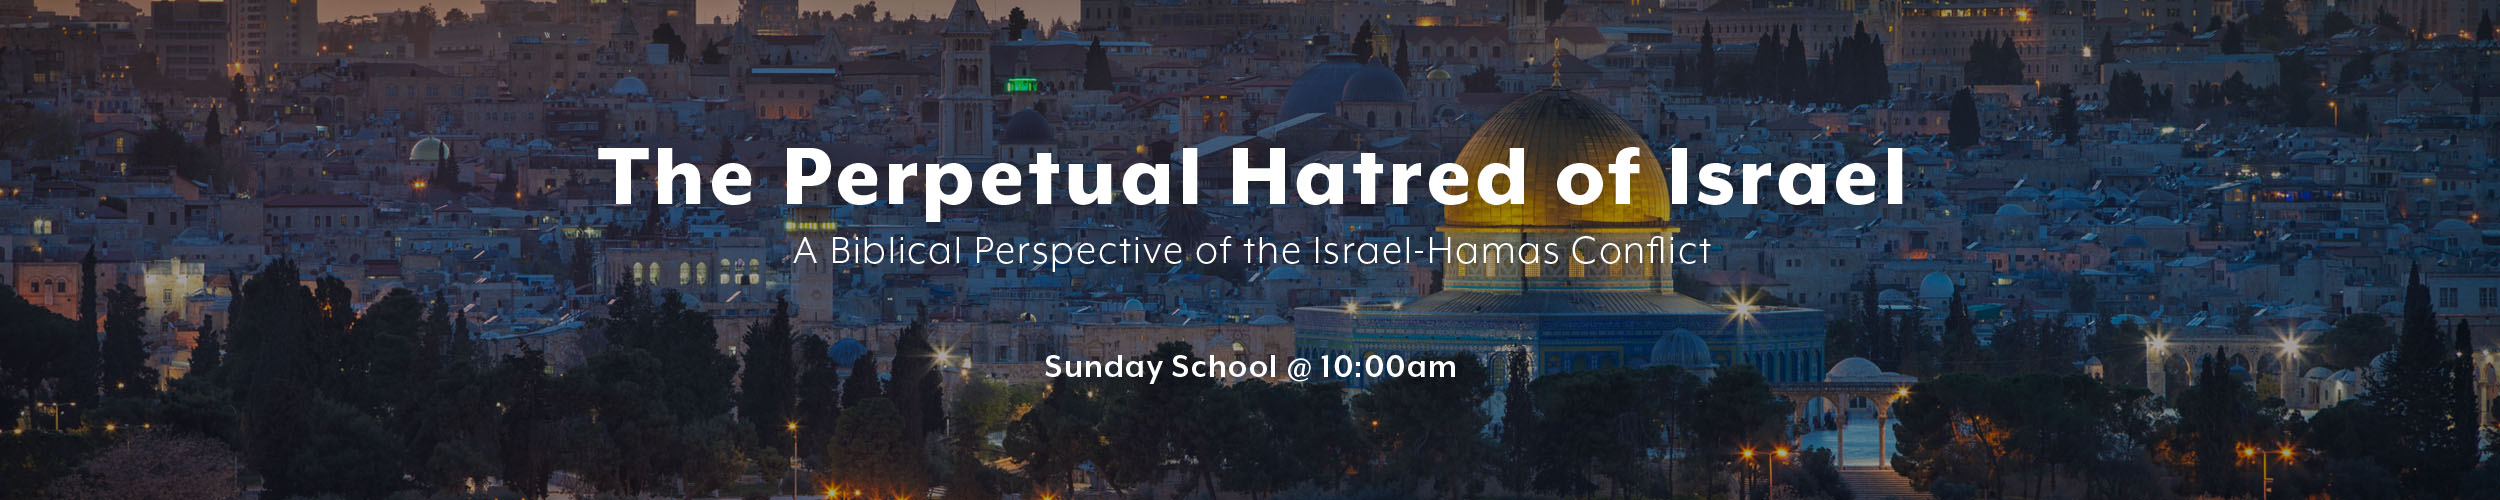 The Perpetual Hatred of Israel: A Biblical Perspective of the Israel-Hamas Conflict